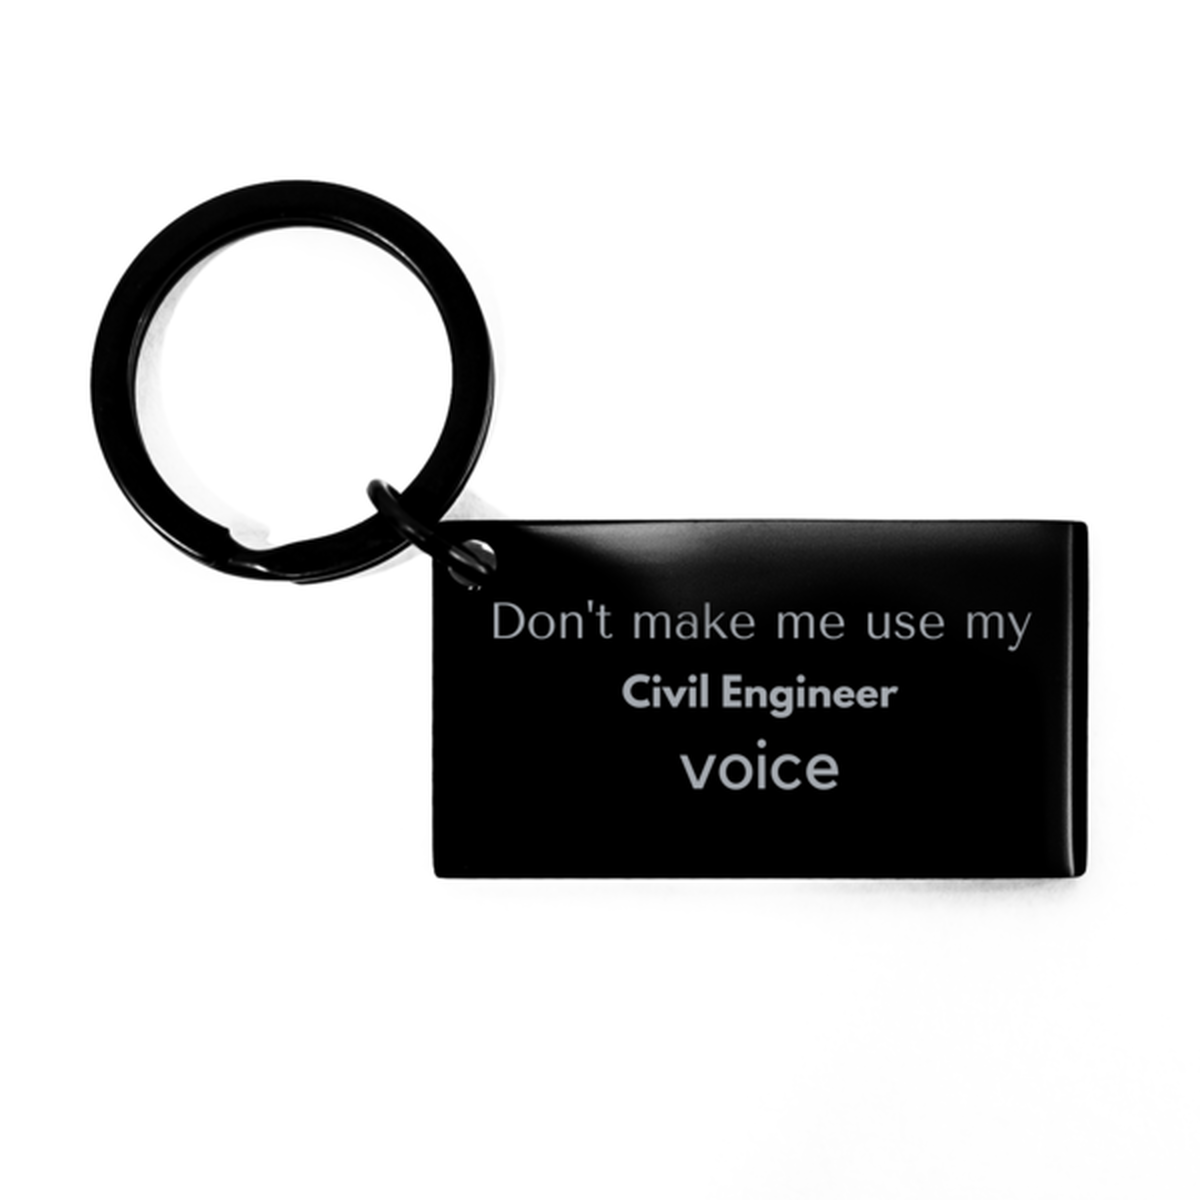 Don't make me use my Civil Engineer voice, Sarcasm Civil Engineer Gifts, Christmas Civil Engineer Keychain Birthday Unique Gifts For Civil Engineer Coworkers, Men, Women, Colleague, Friends